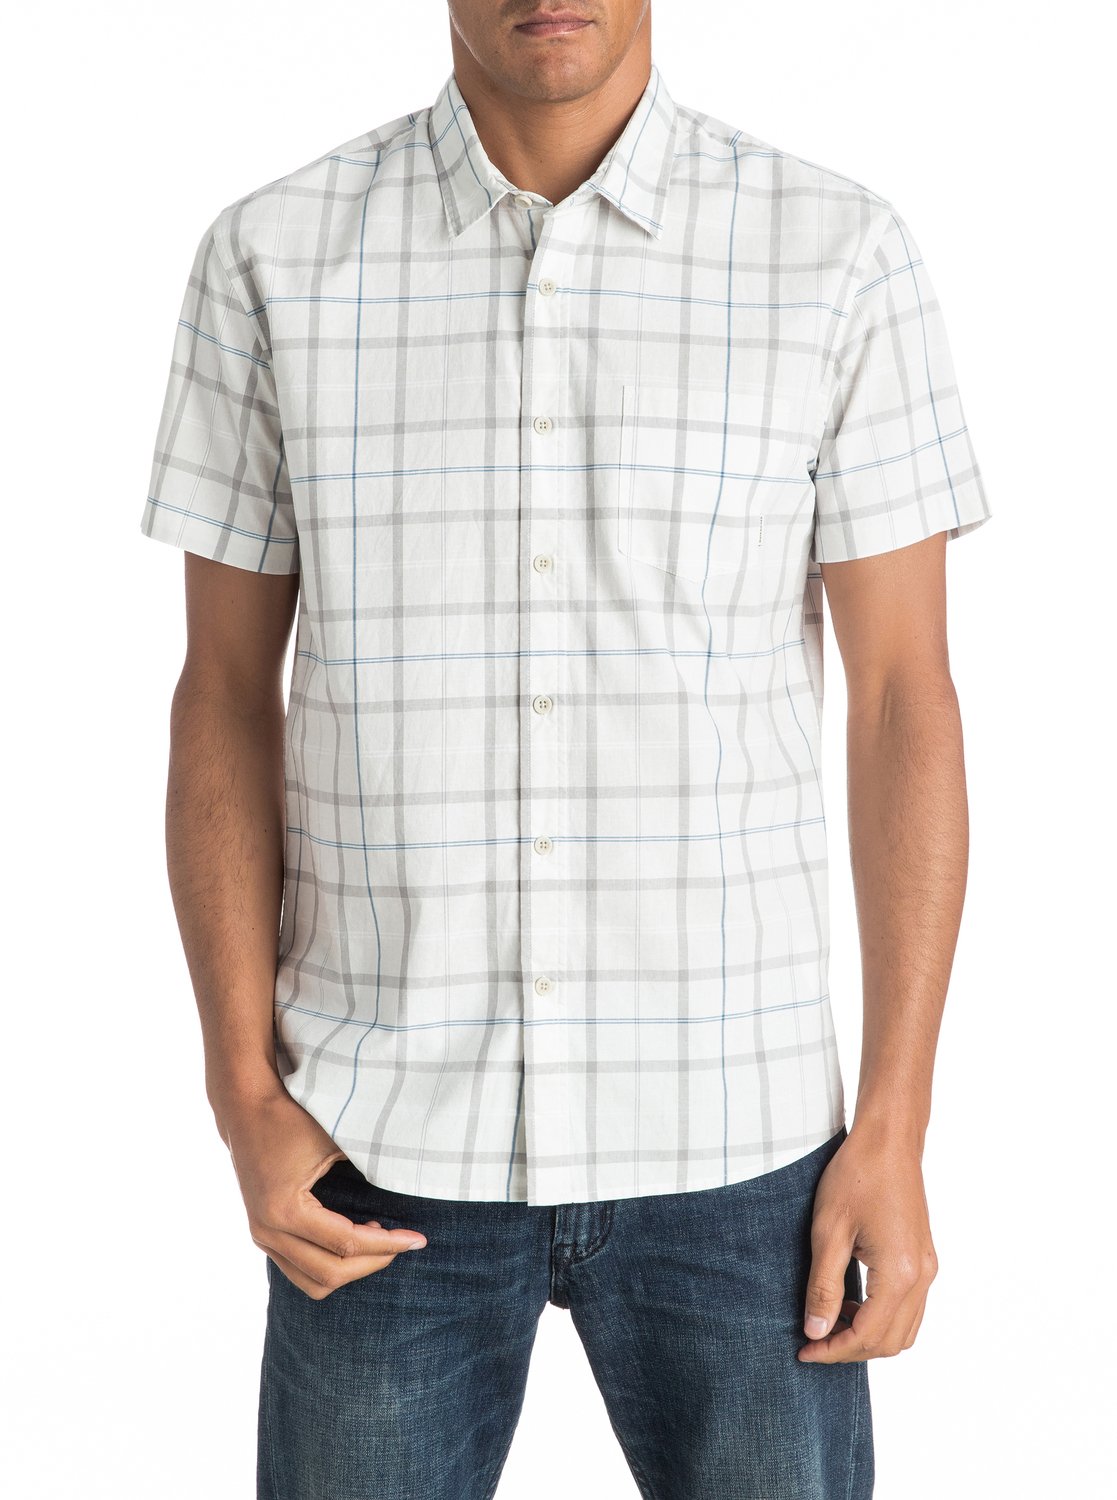 Everyday Check - Chemise a manches courtes pour Homme - Quiksilver